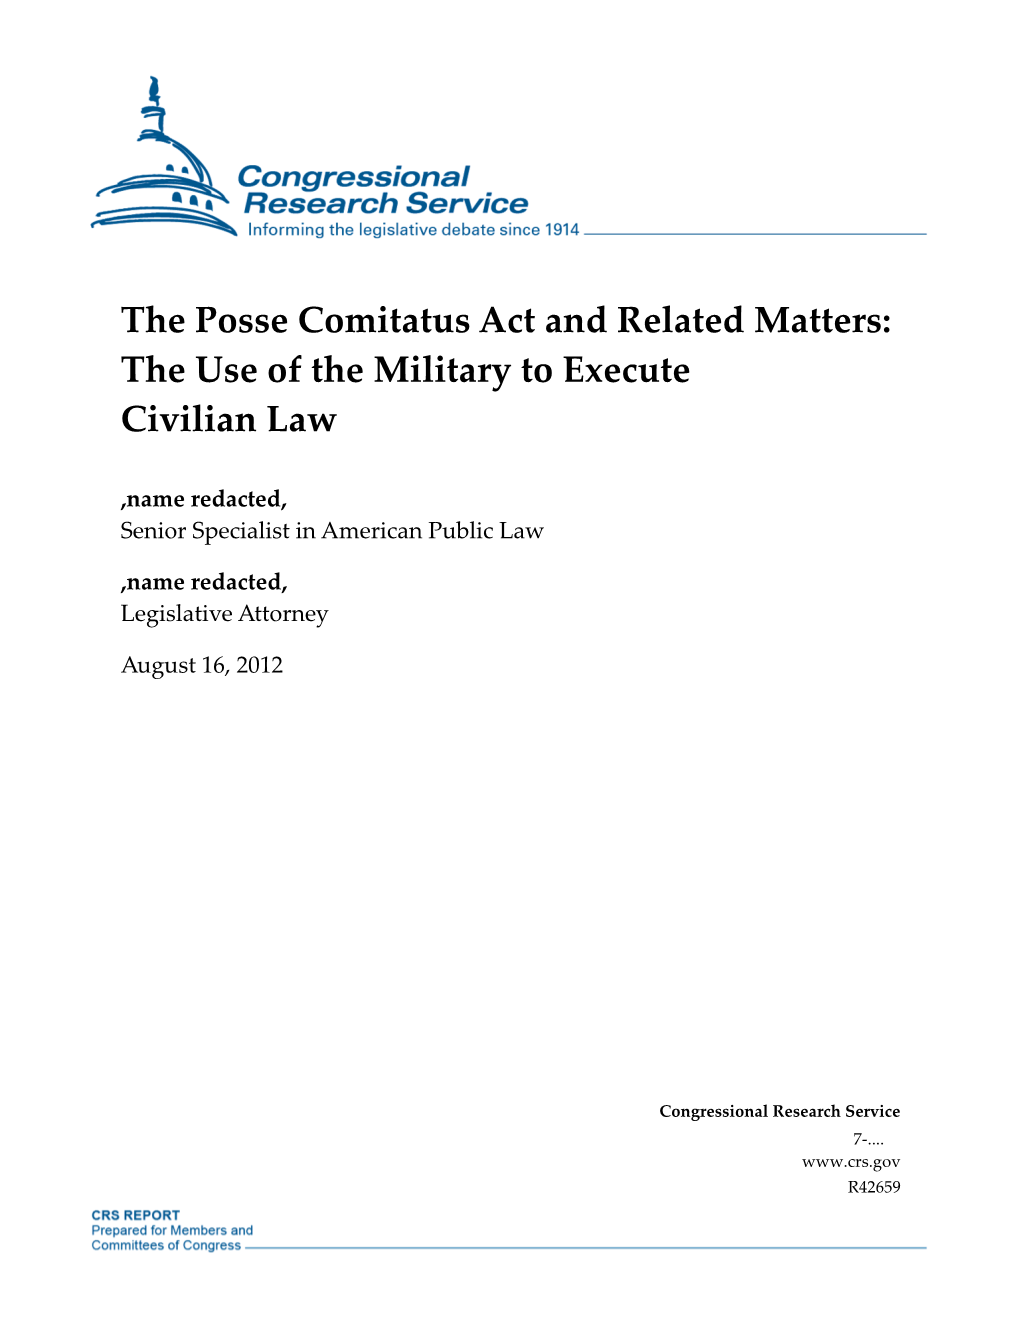 The Posse Comitatus Act and Related Matters: the Use of the Military to Execute Civilian Law